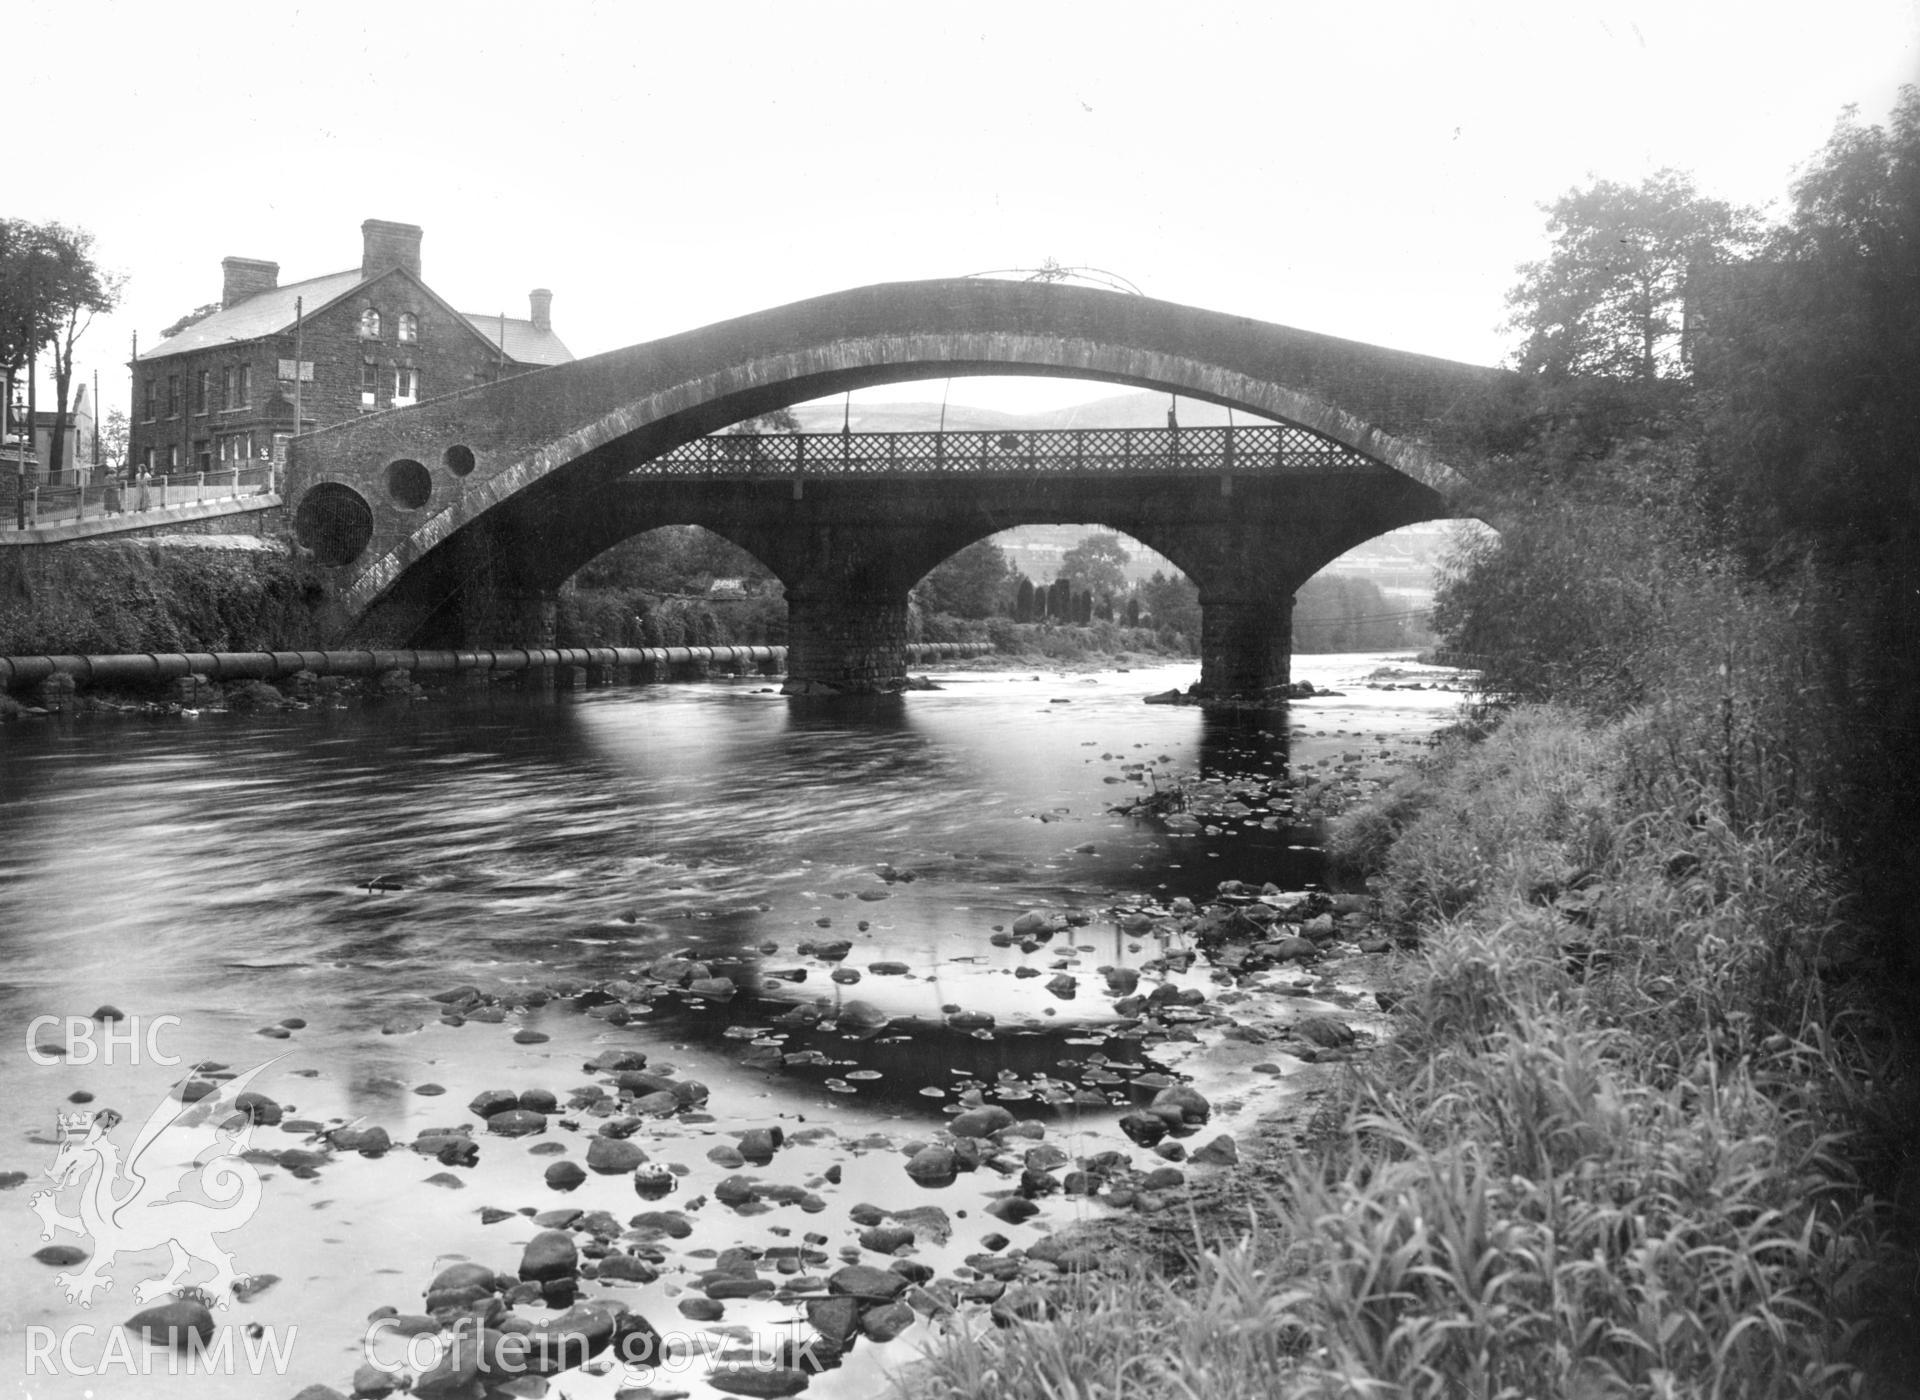 1 b/w print showing view of Pontypridd Old Bridge, collated by the former Central Office of Information.